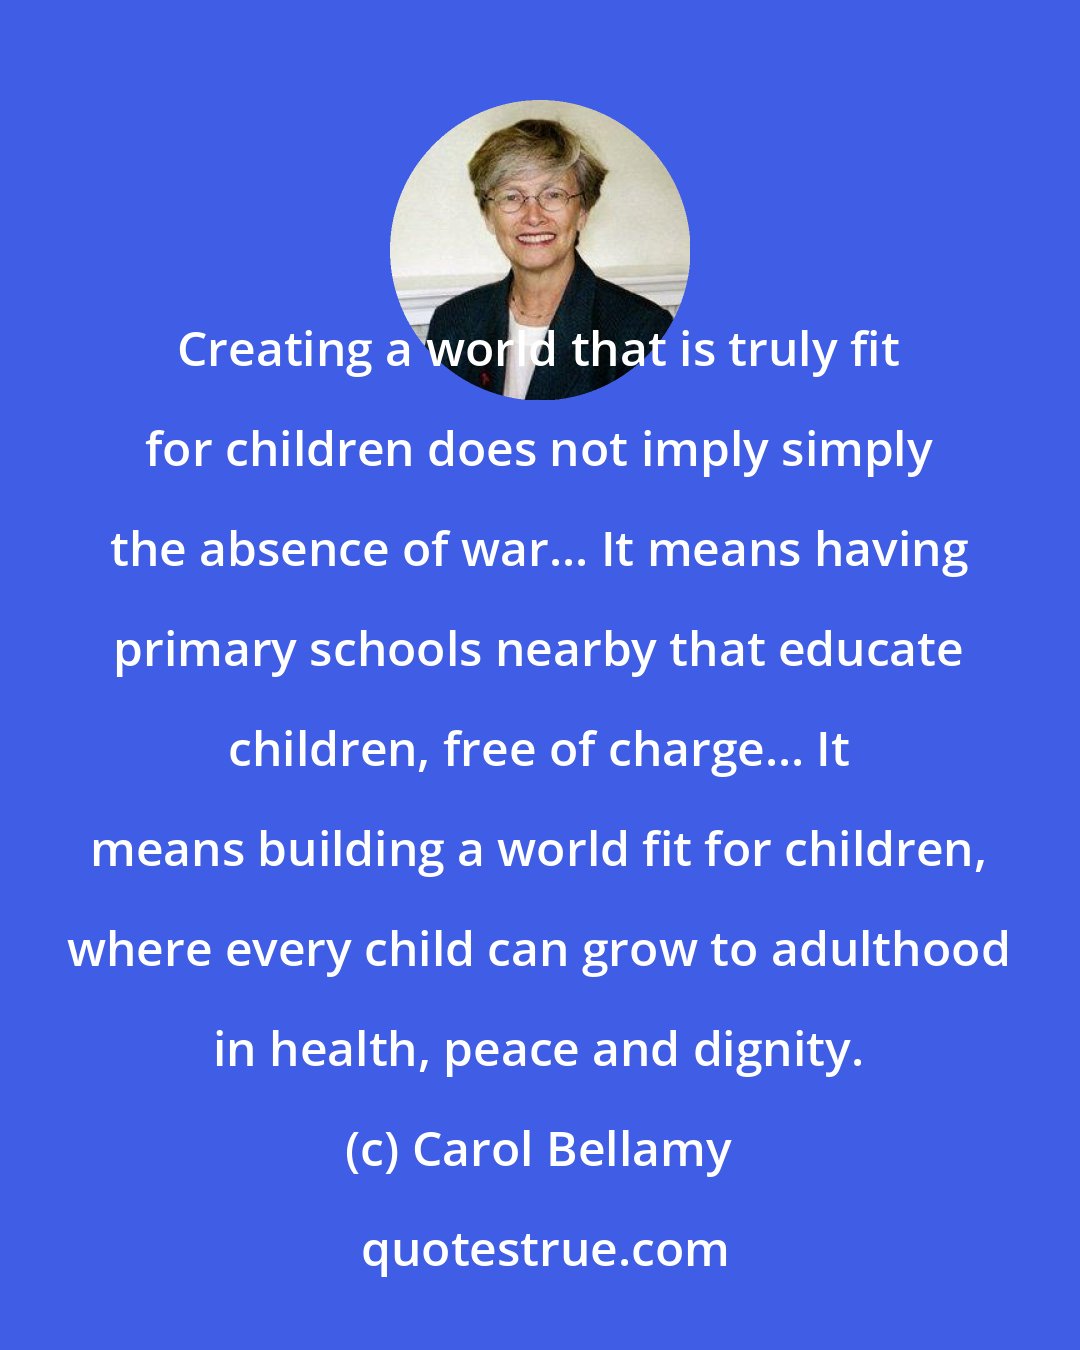 Carol Bellamy: Creating a world that is truly fit for children does not imply simply the absence of war... It means having primary schools nearby that educate children, free of charge... It means building a world fit for children, where every child can grow to adulthood in health, peace and dignity.